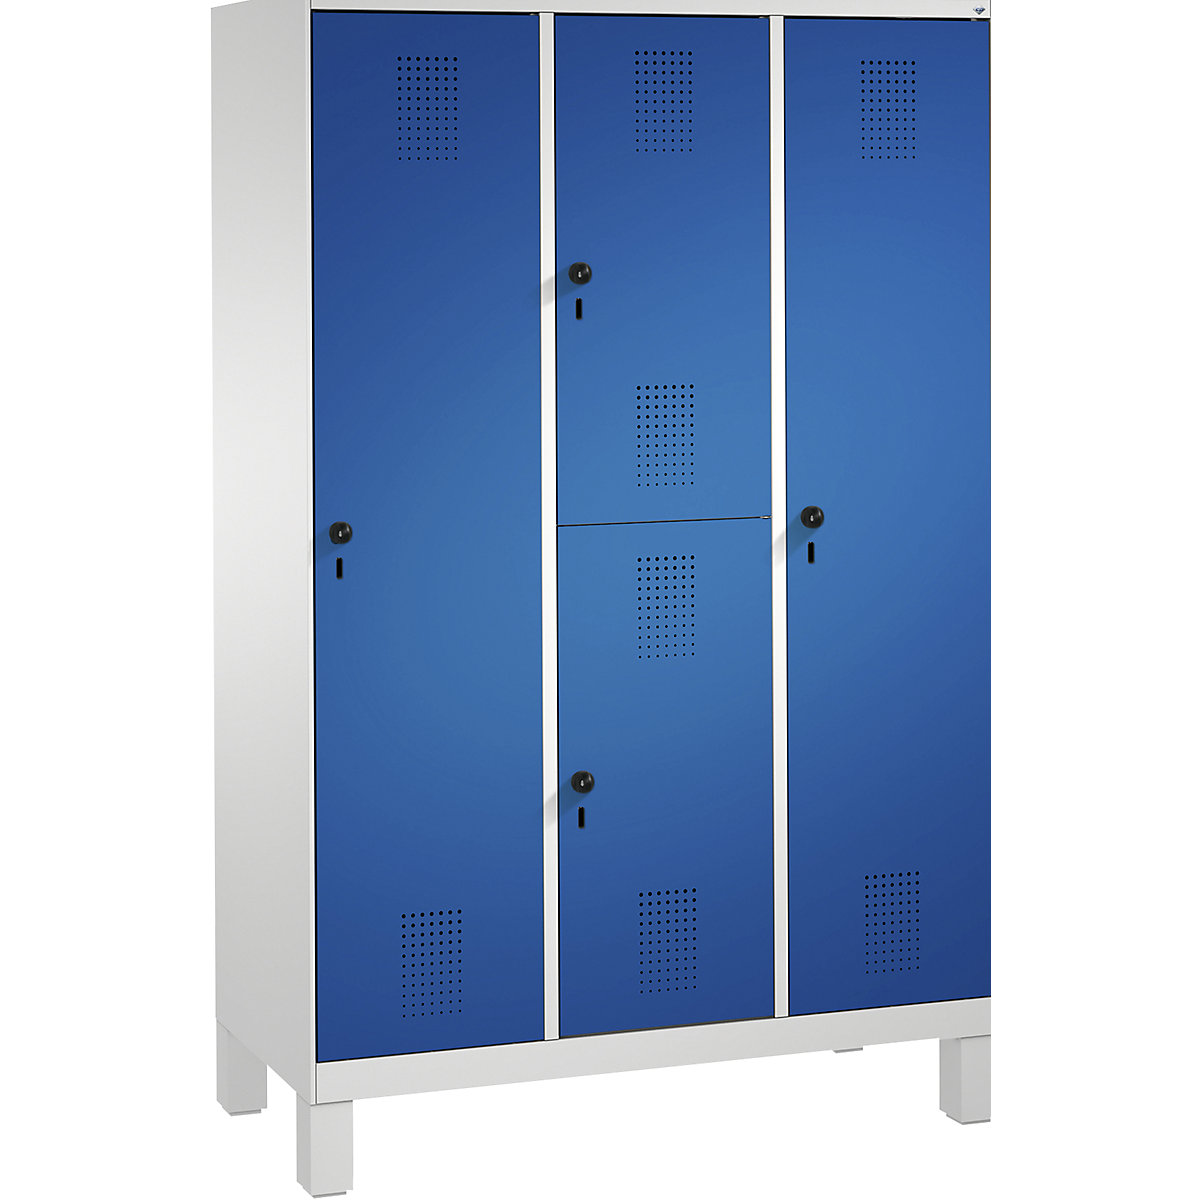 EVOLO combination cupboard, single and double tier – C+P, 3 compartments, 4 doors, compartment width 400 mm, with feet, light grey / gentian blue-3